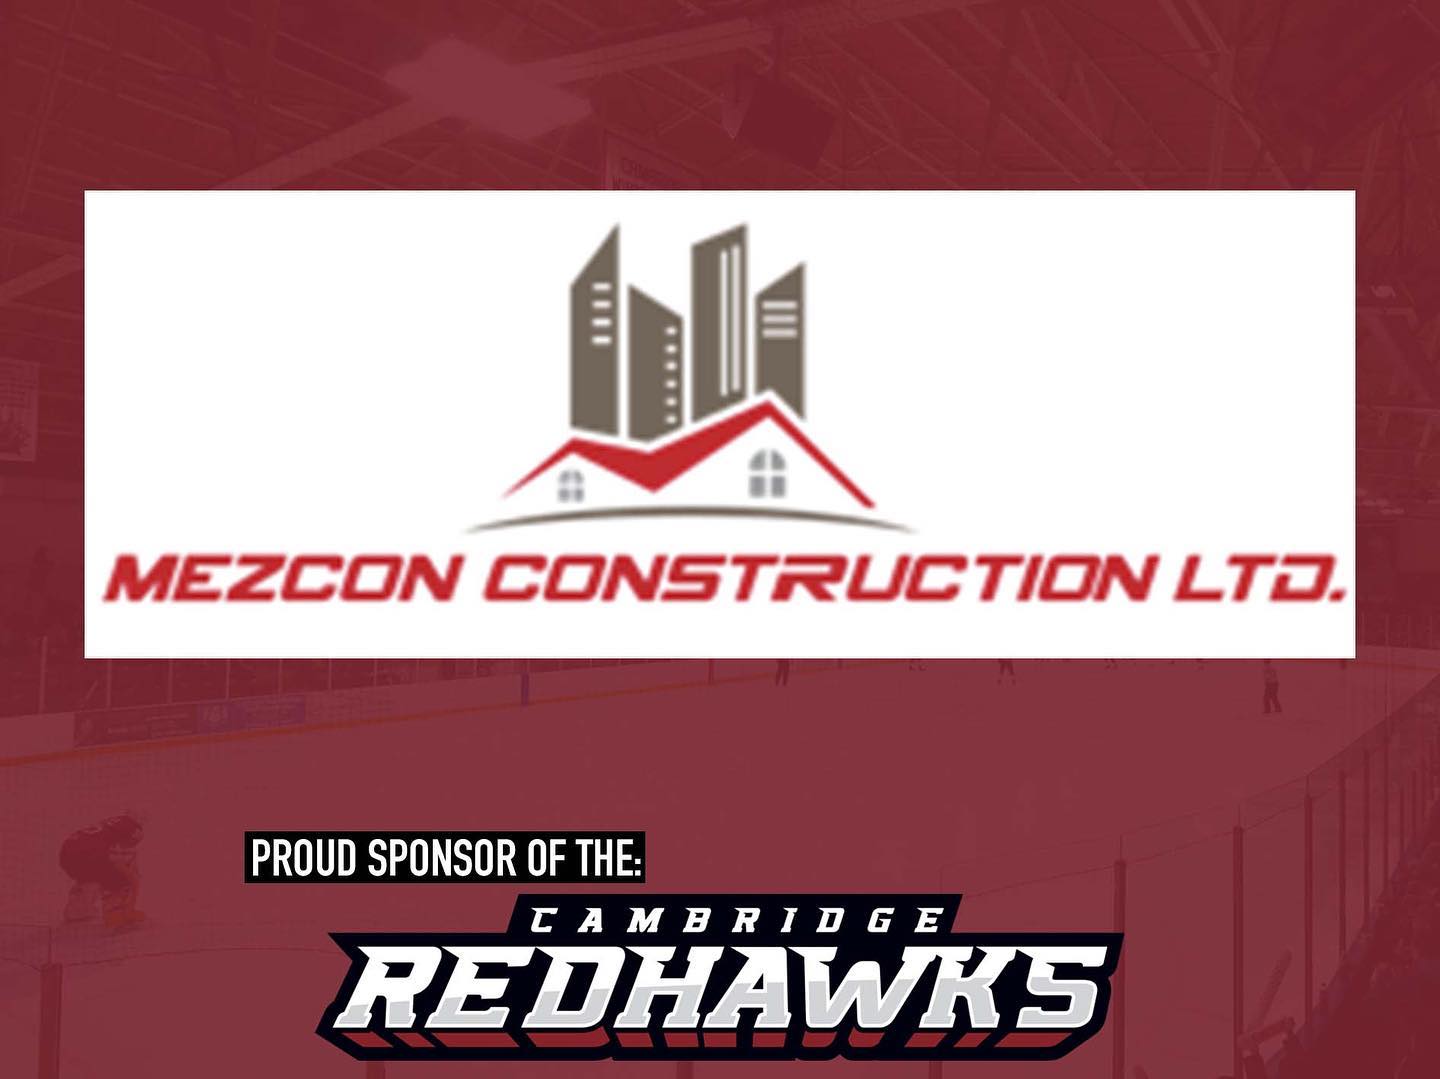 🚨 SPONSOR ANNOUNCEMENT 🚨

We are happy to be partners with @mezcon.construction this season! Thank you for your support.

#RedHawksTakeFlight #mezconconstruction